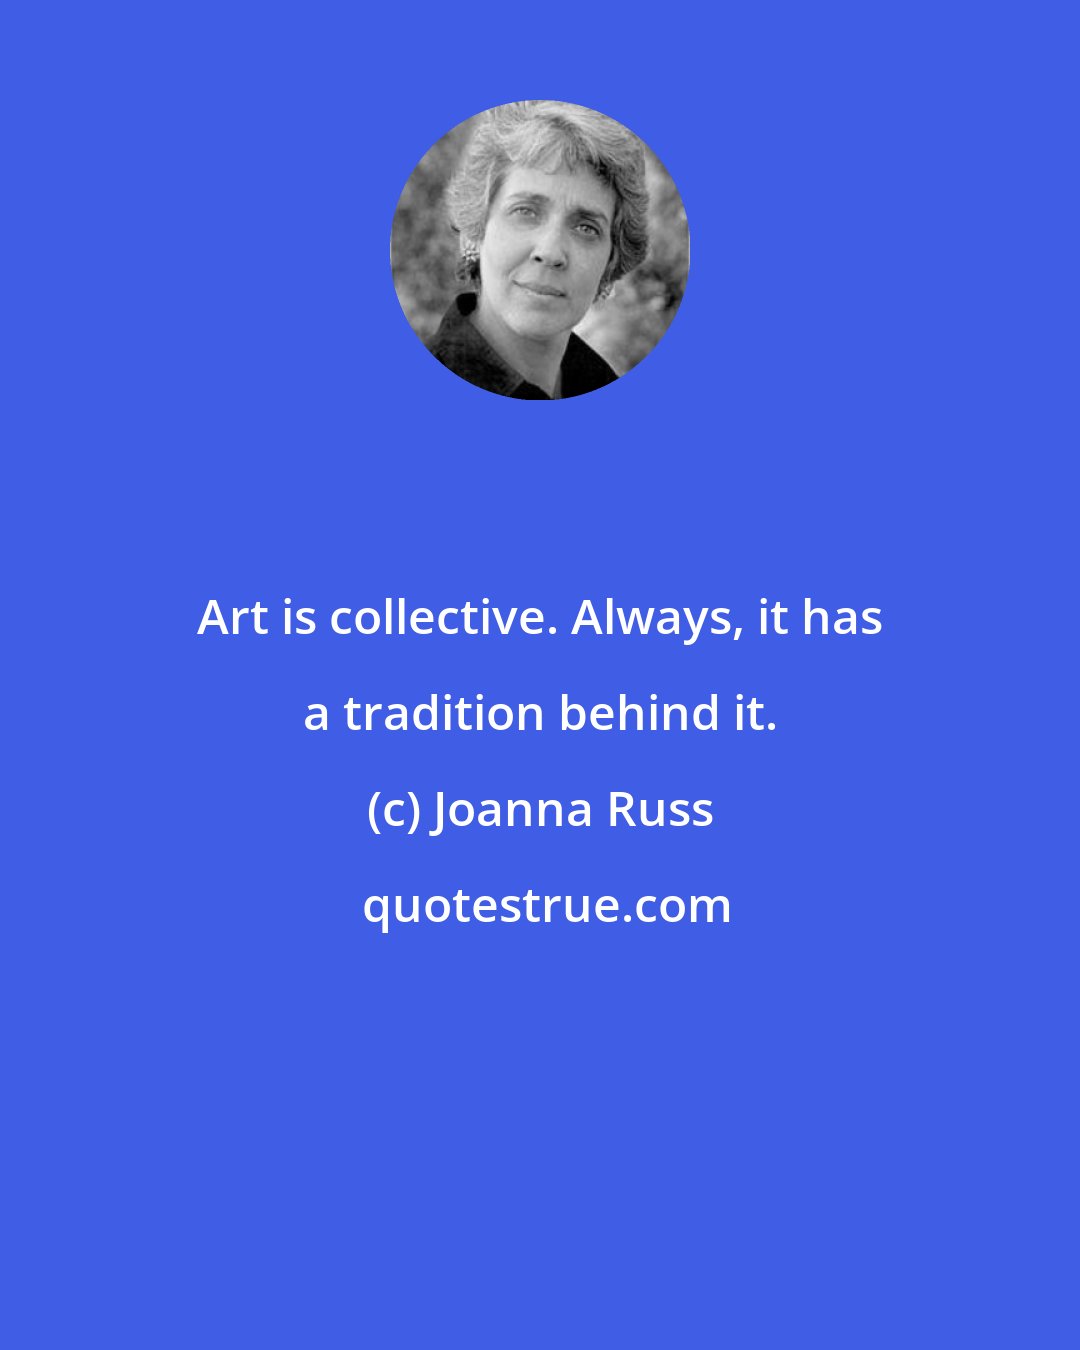 Joanna Russ: Art is collective. Always, it has a tradition behind it.